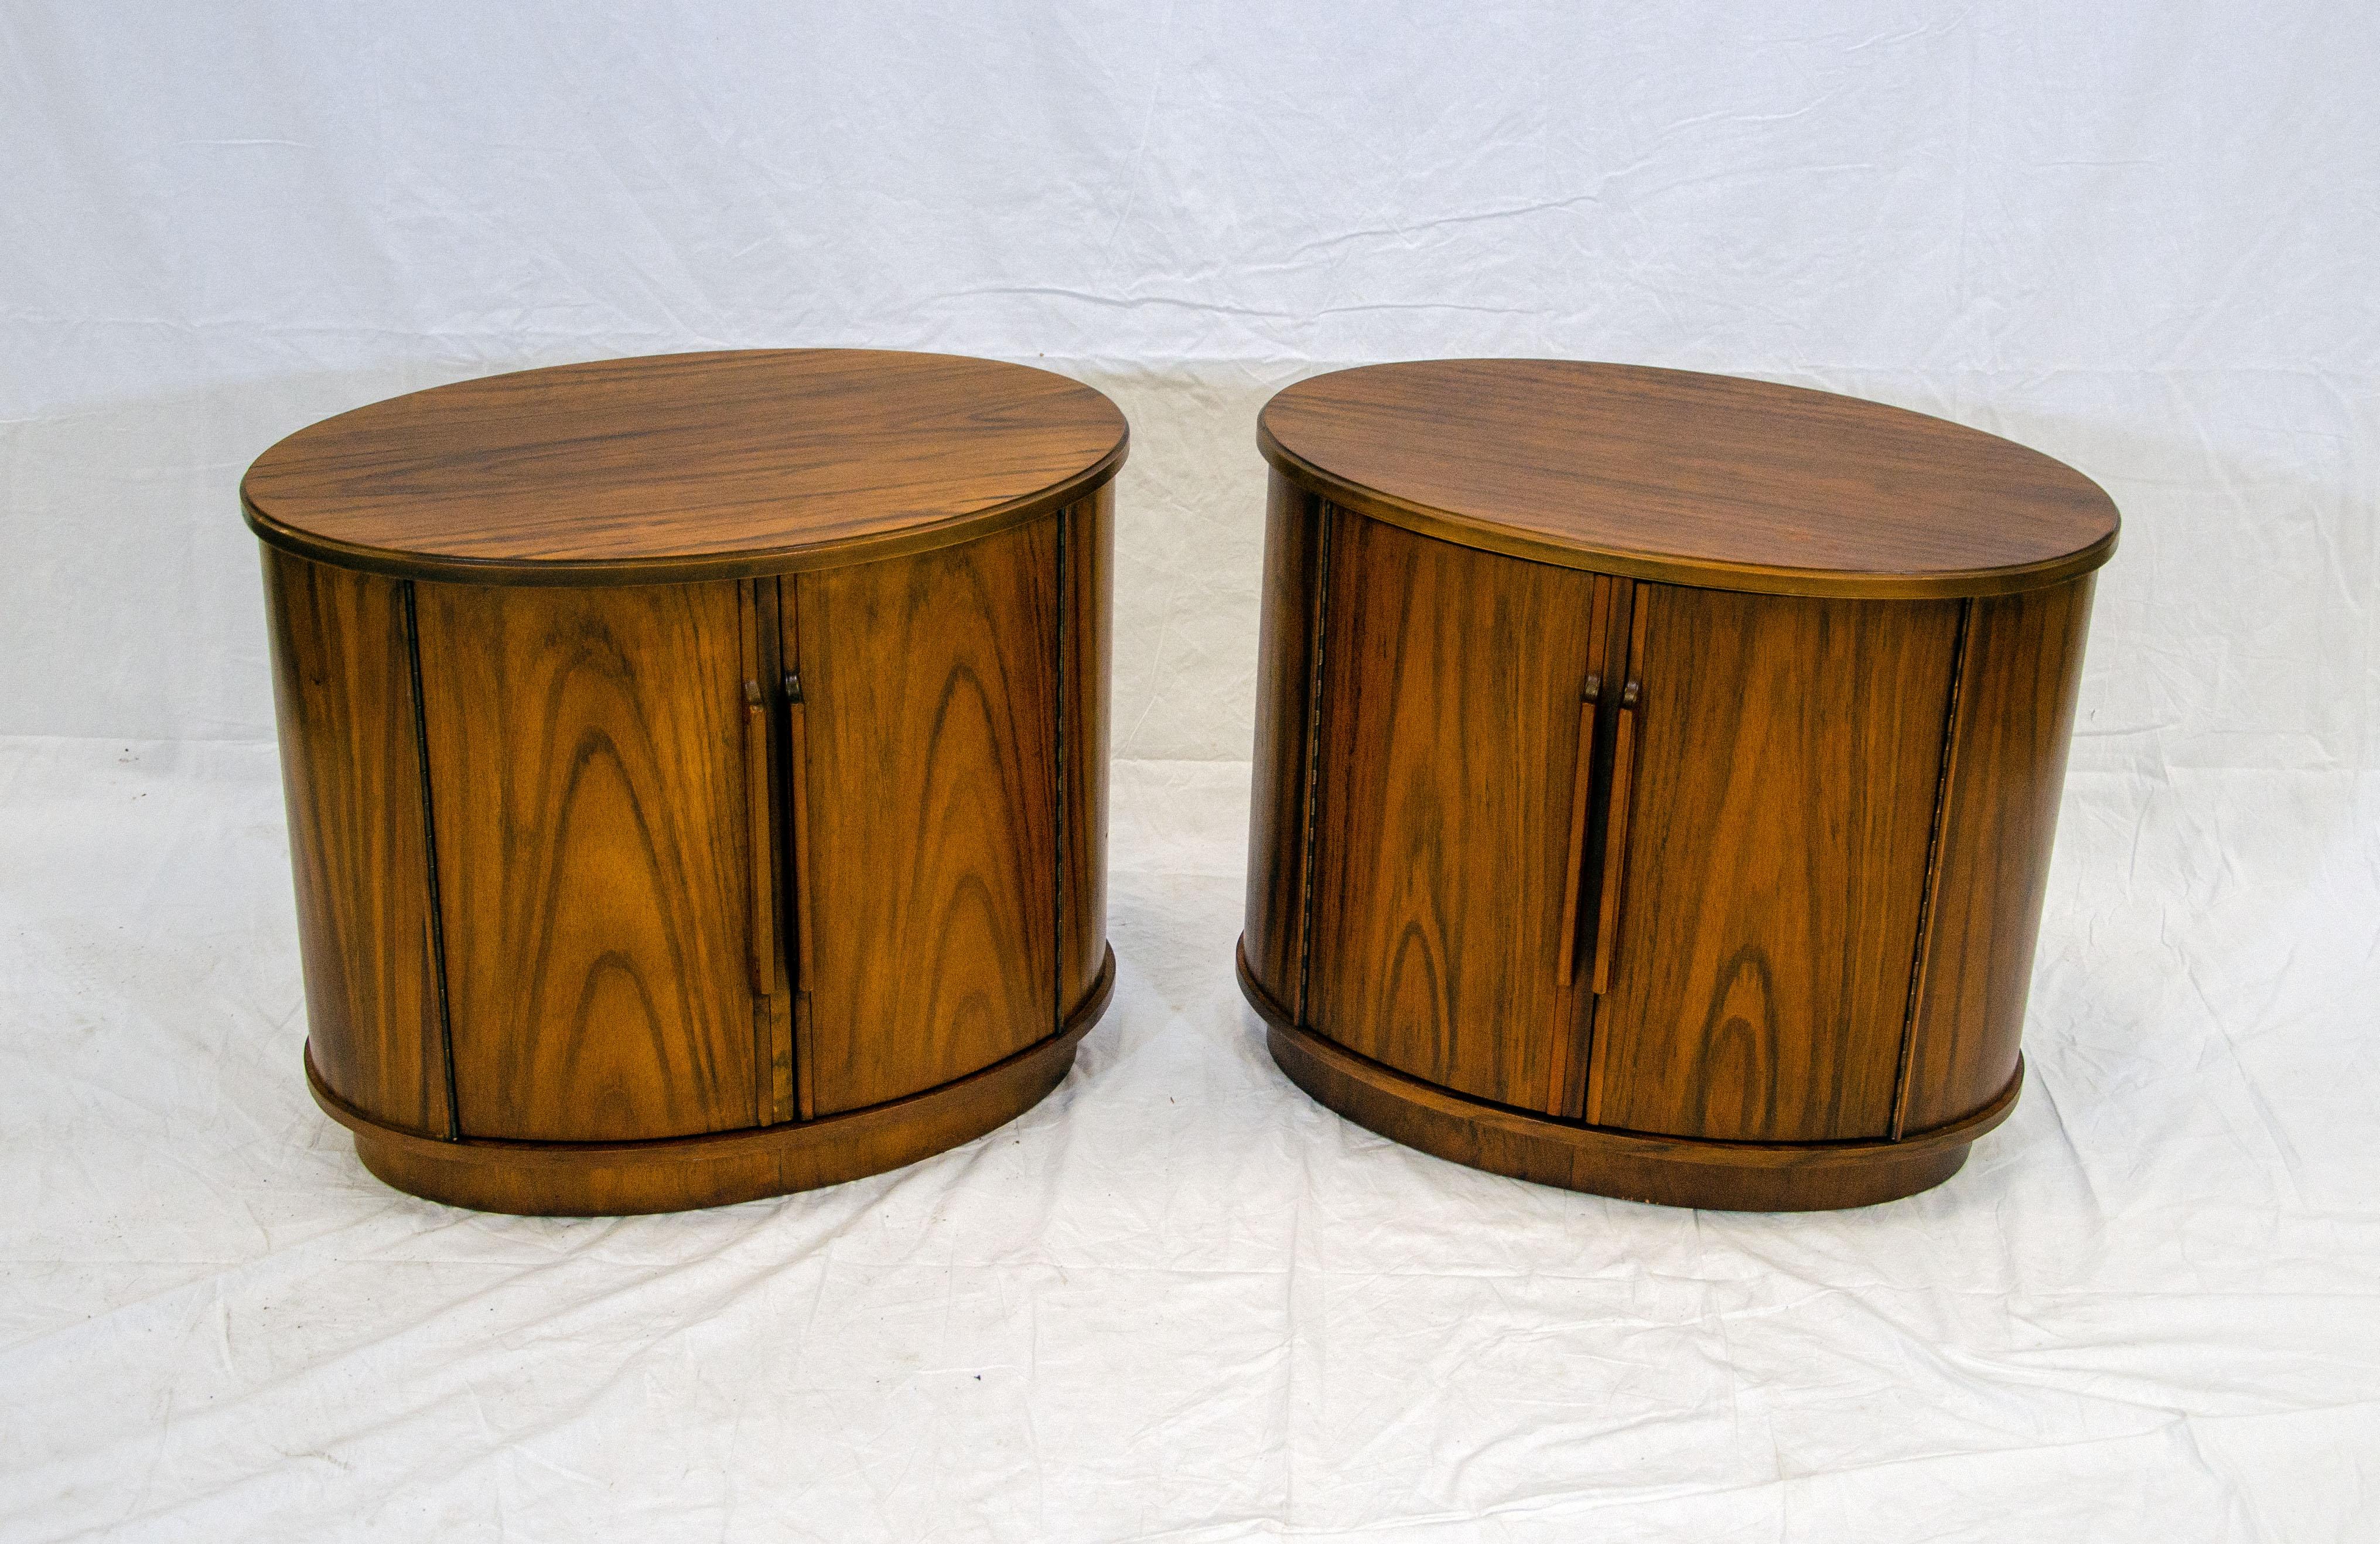 Unusual oval-shaped pair of nightstands or end tables from the Heritage Furniture division of Drexel. There are two doors that have a width of 17 1/2